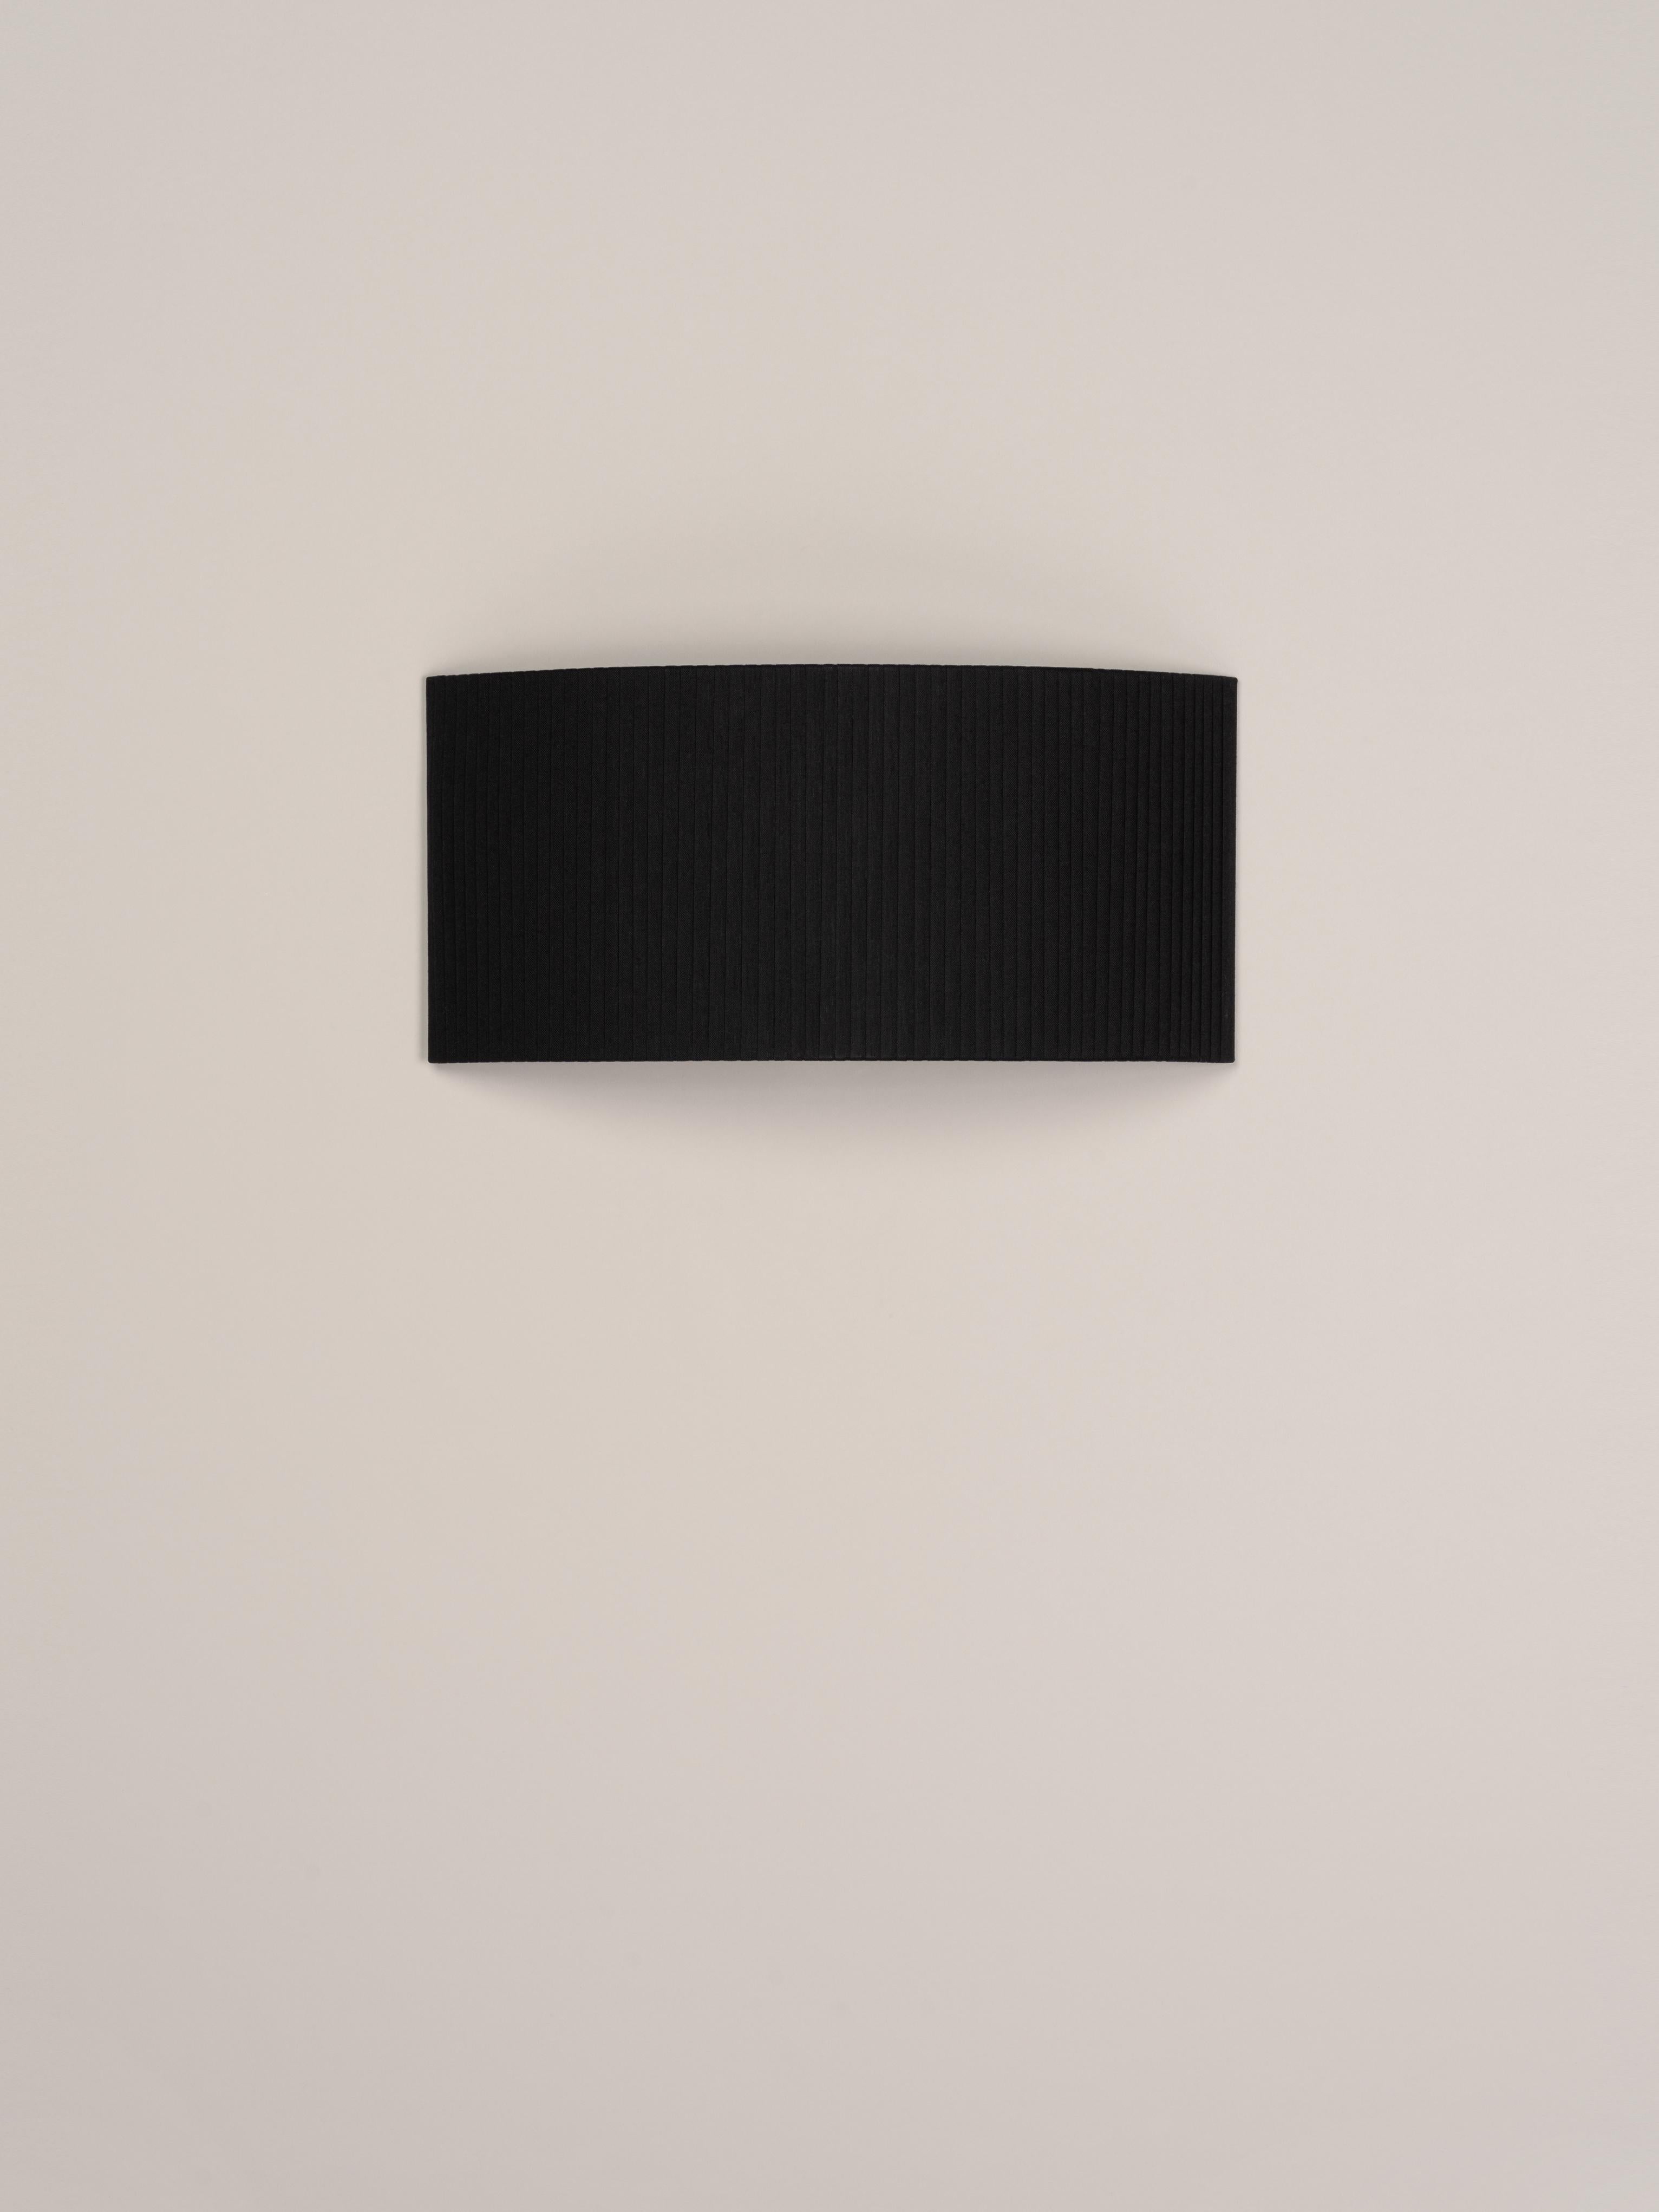 Black Comodín Rectangular wall lamp by Santa & Cole
Dimensions: D 50 x W 13 x H 24 cm
Materials: Metal, ribbon.

This minimalist wall lamp humanises neutral spaces with its colourful and functional sobriety. The shade is fondly hand-ribboned,